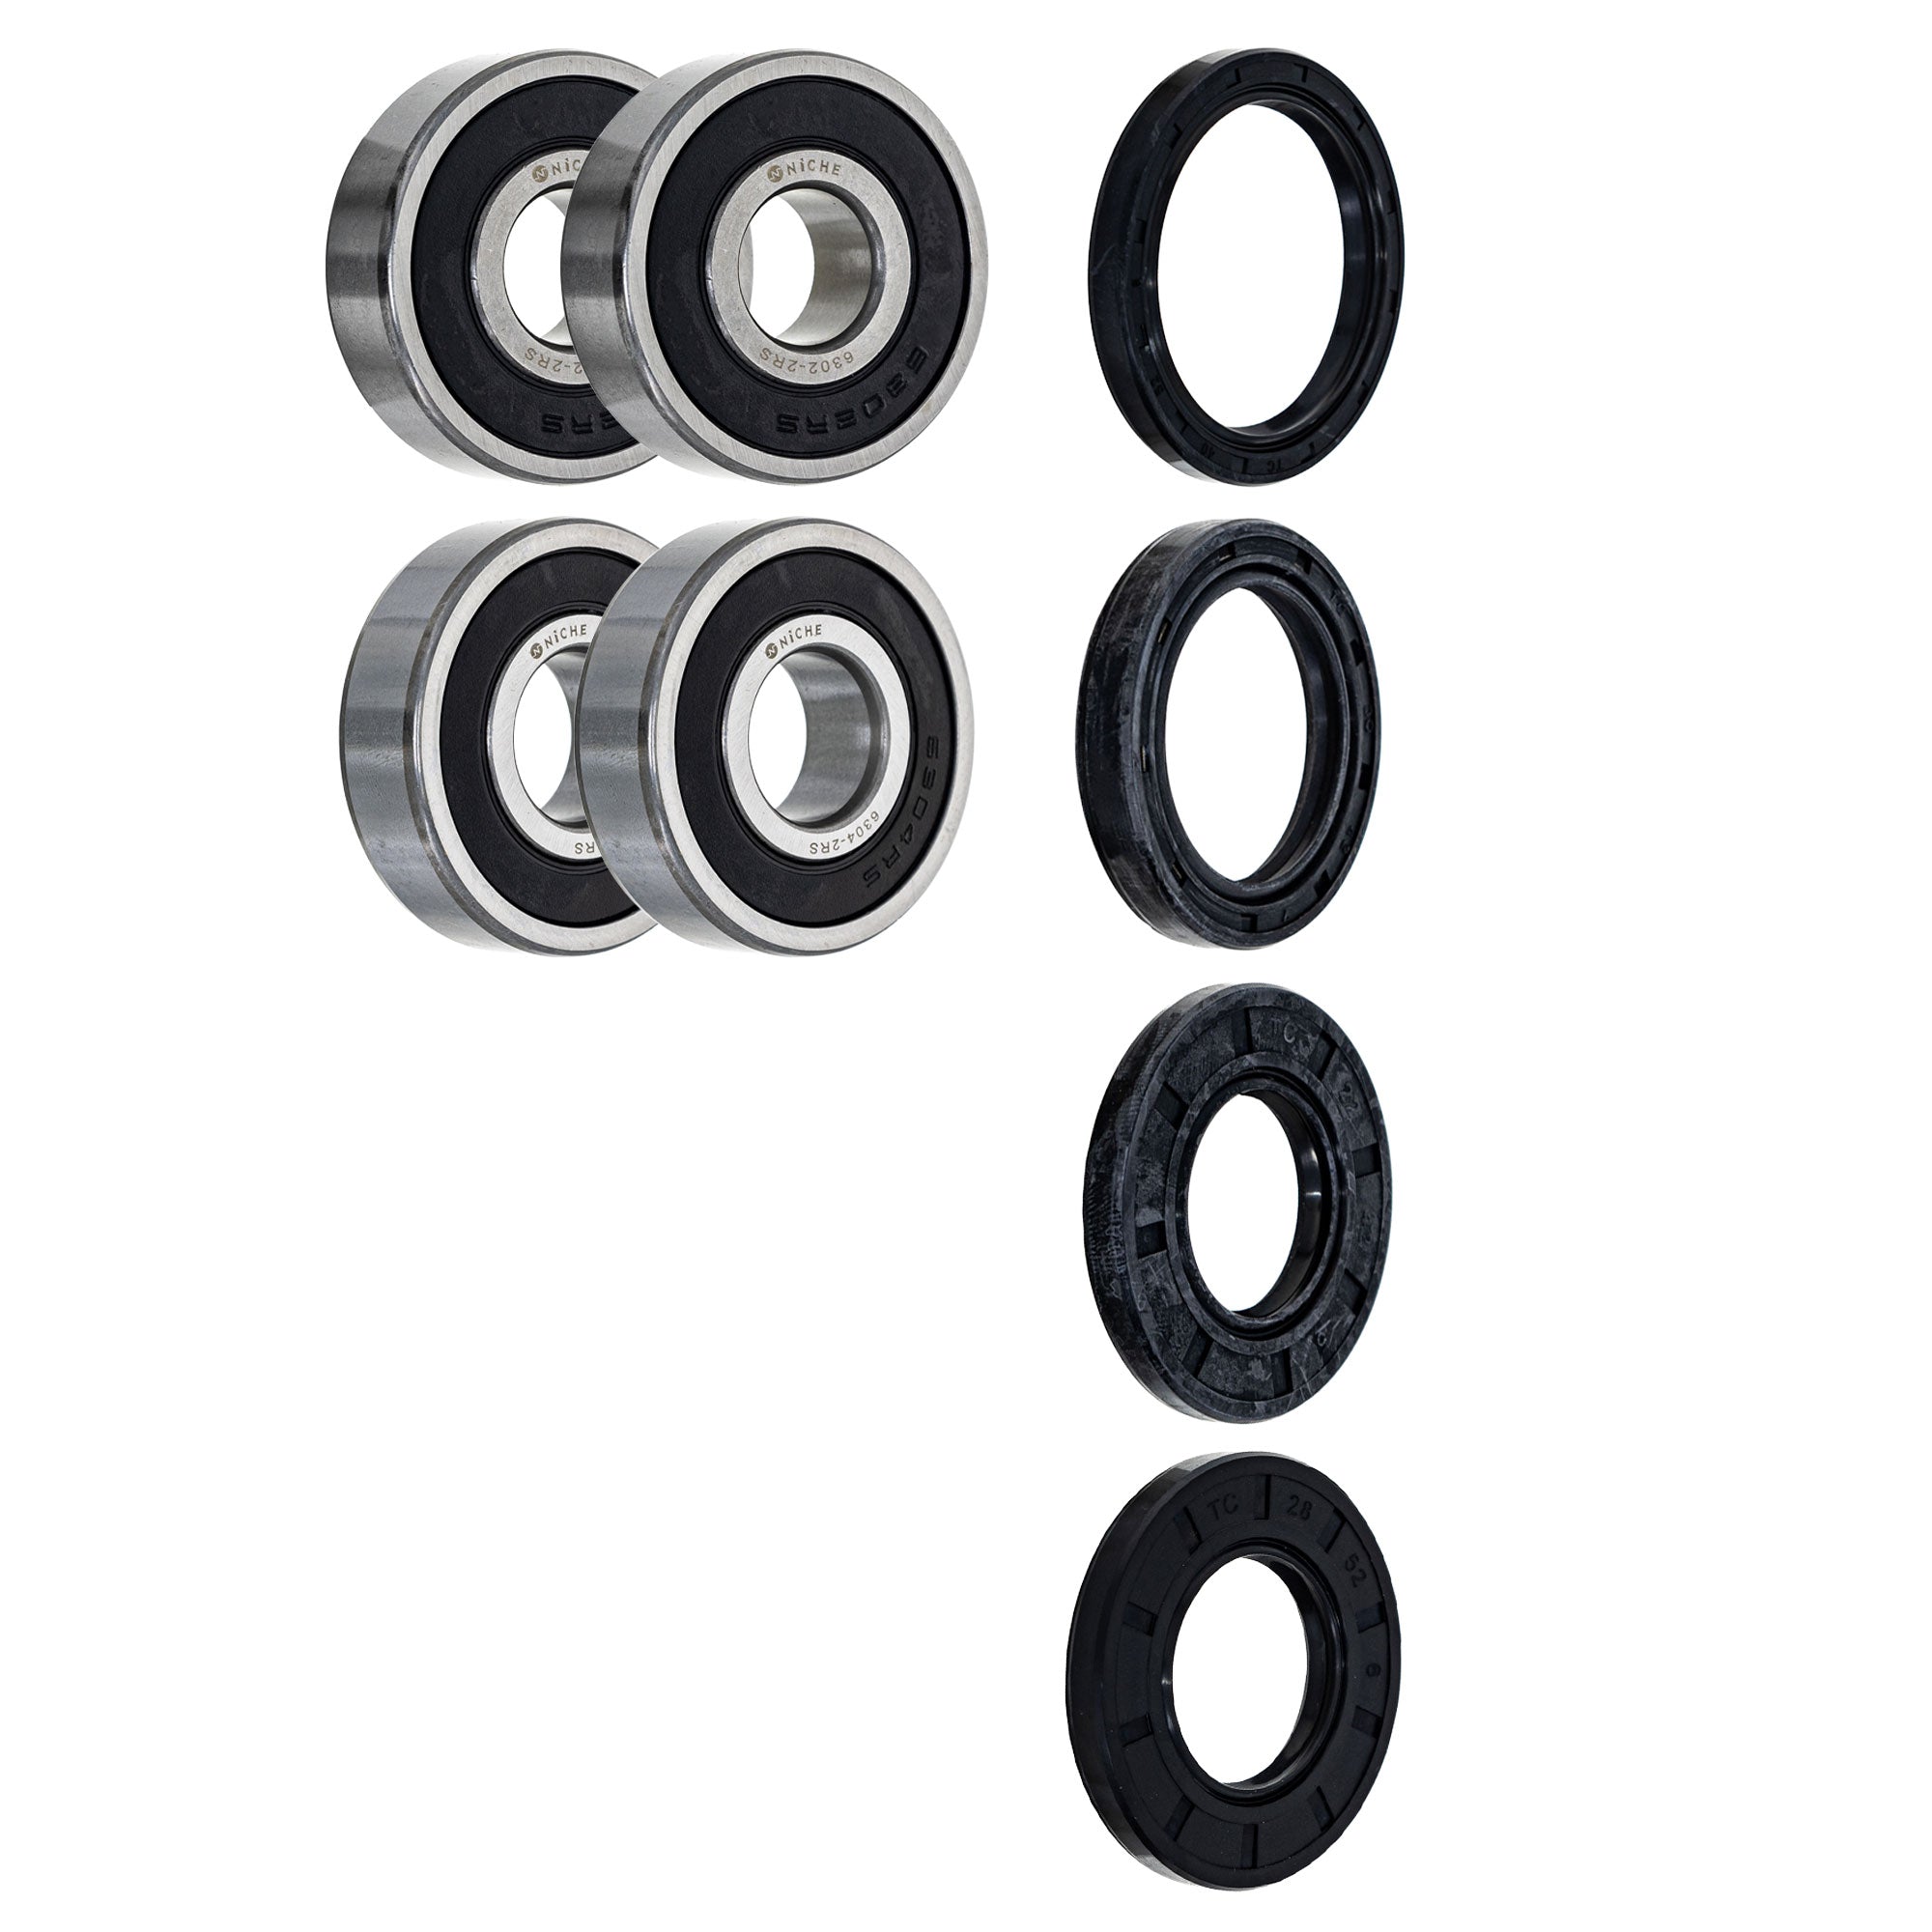 Wheel Bearing Seal Kit for zOTHER Vulcan Voyager Concours NICHE MK1008559